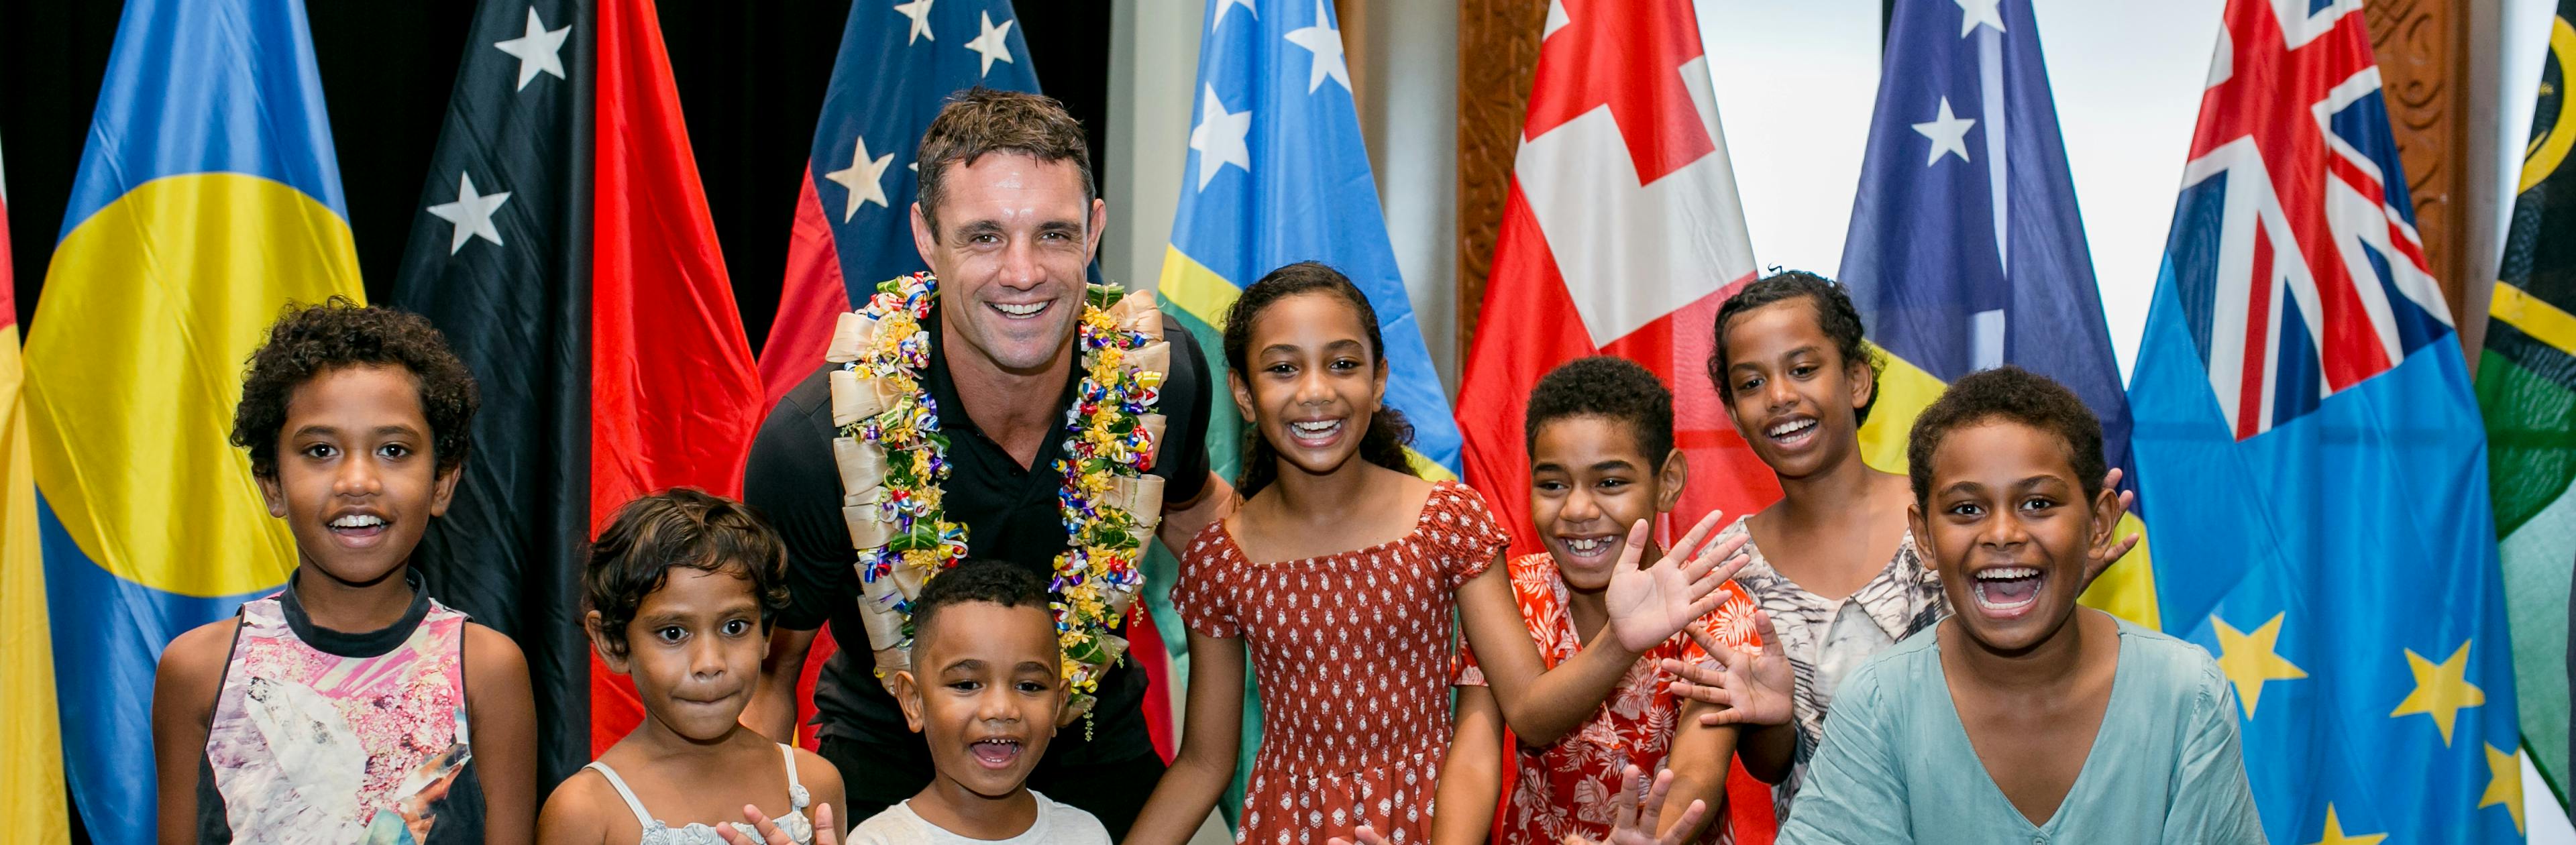 Dan Carter smiling with kids from the Pacific 